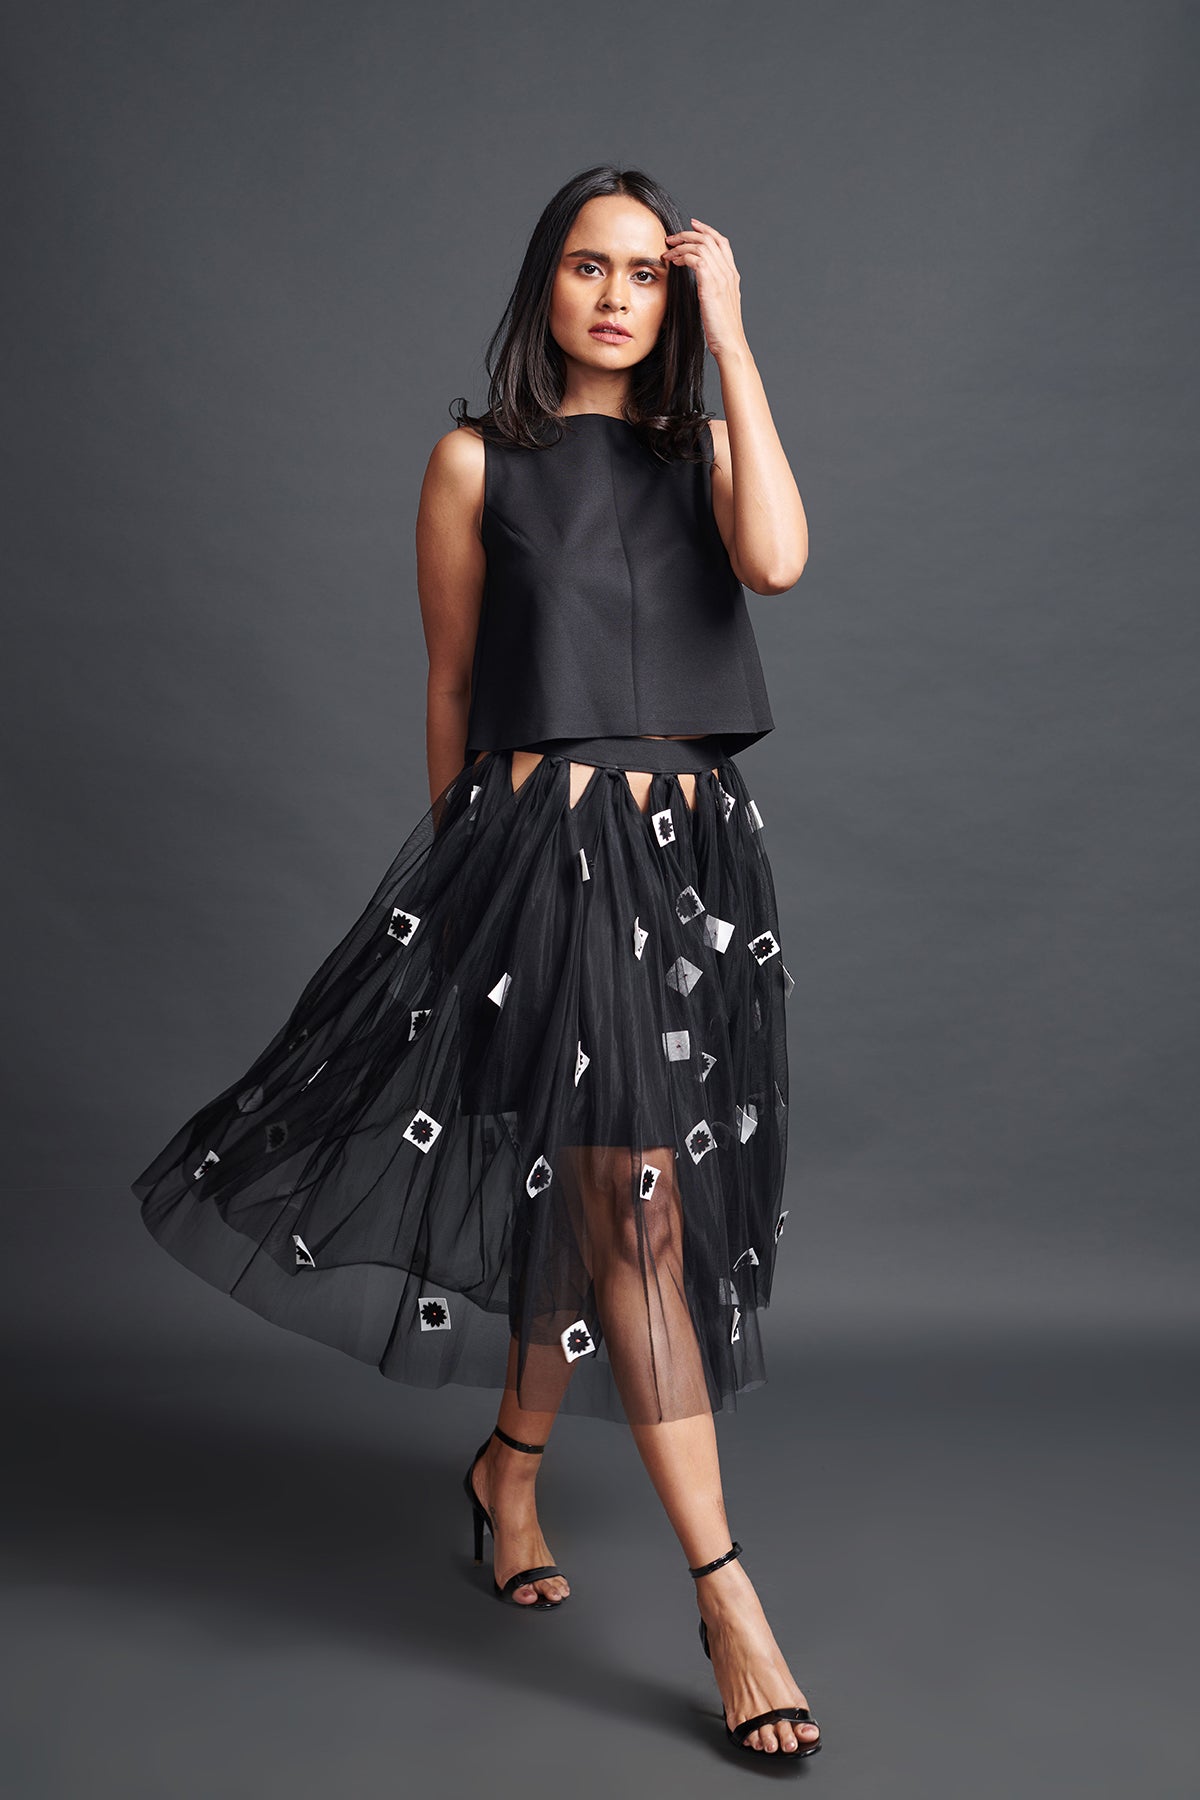 Image of BLACK CONFETTI DETAILED PANELLED NET SKIRT WITH SLEEVELESS CROP TOP.From savoirfashions.com